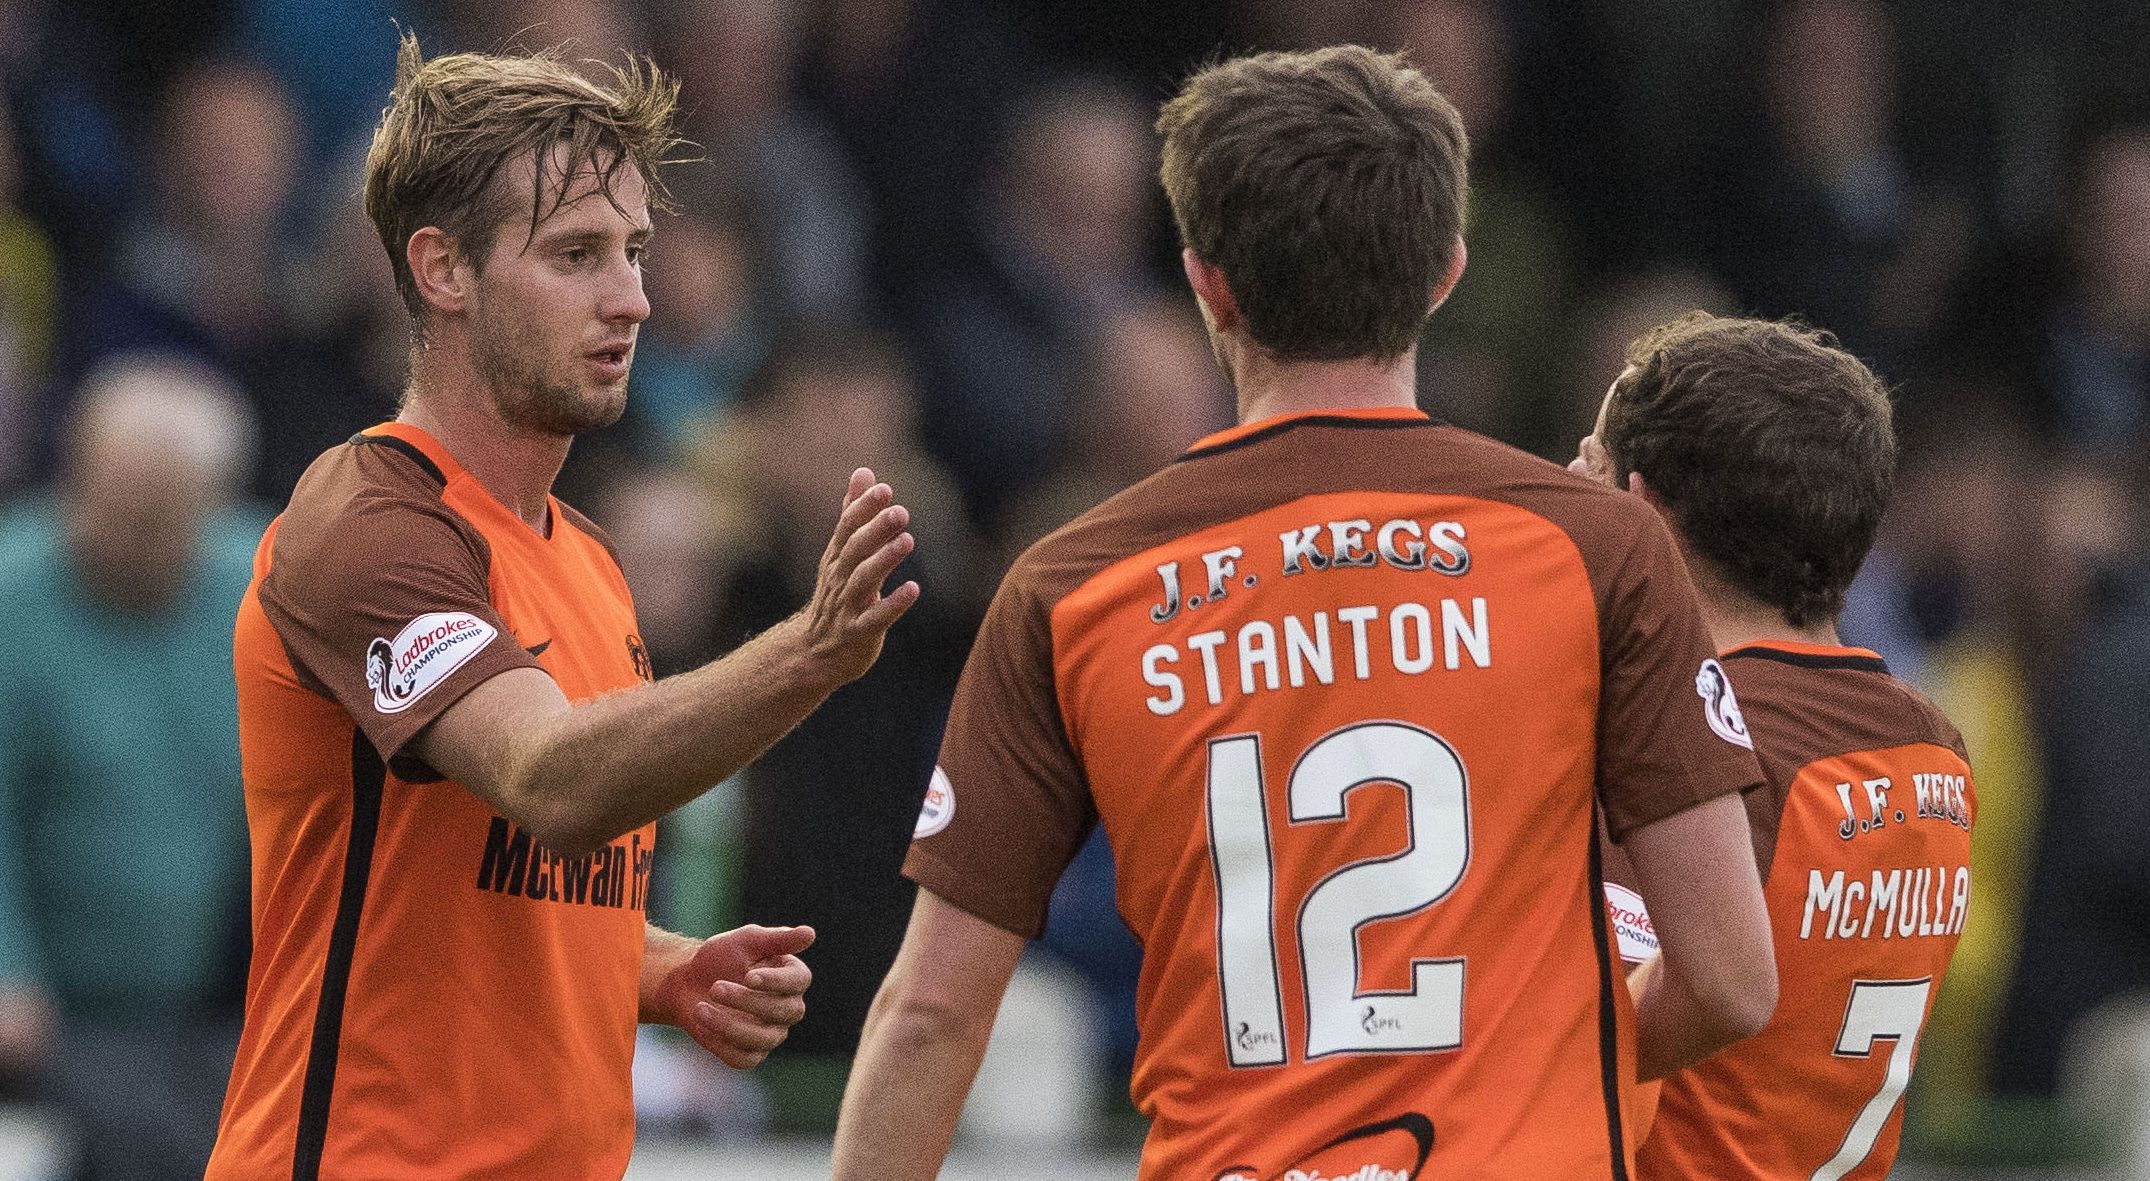 Billy King celebrates his goal against Buckie with his team-mates.